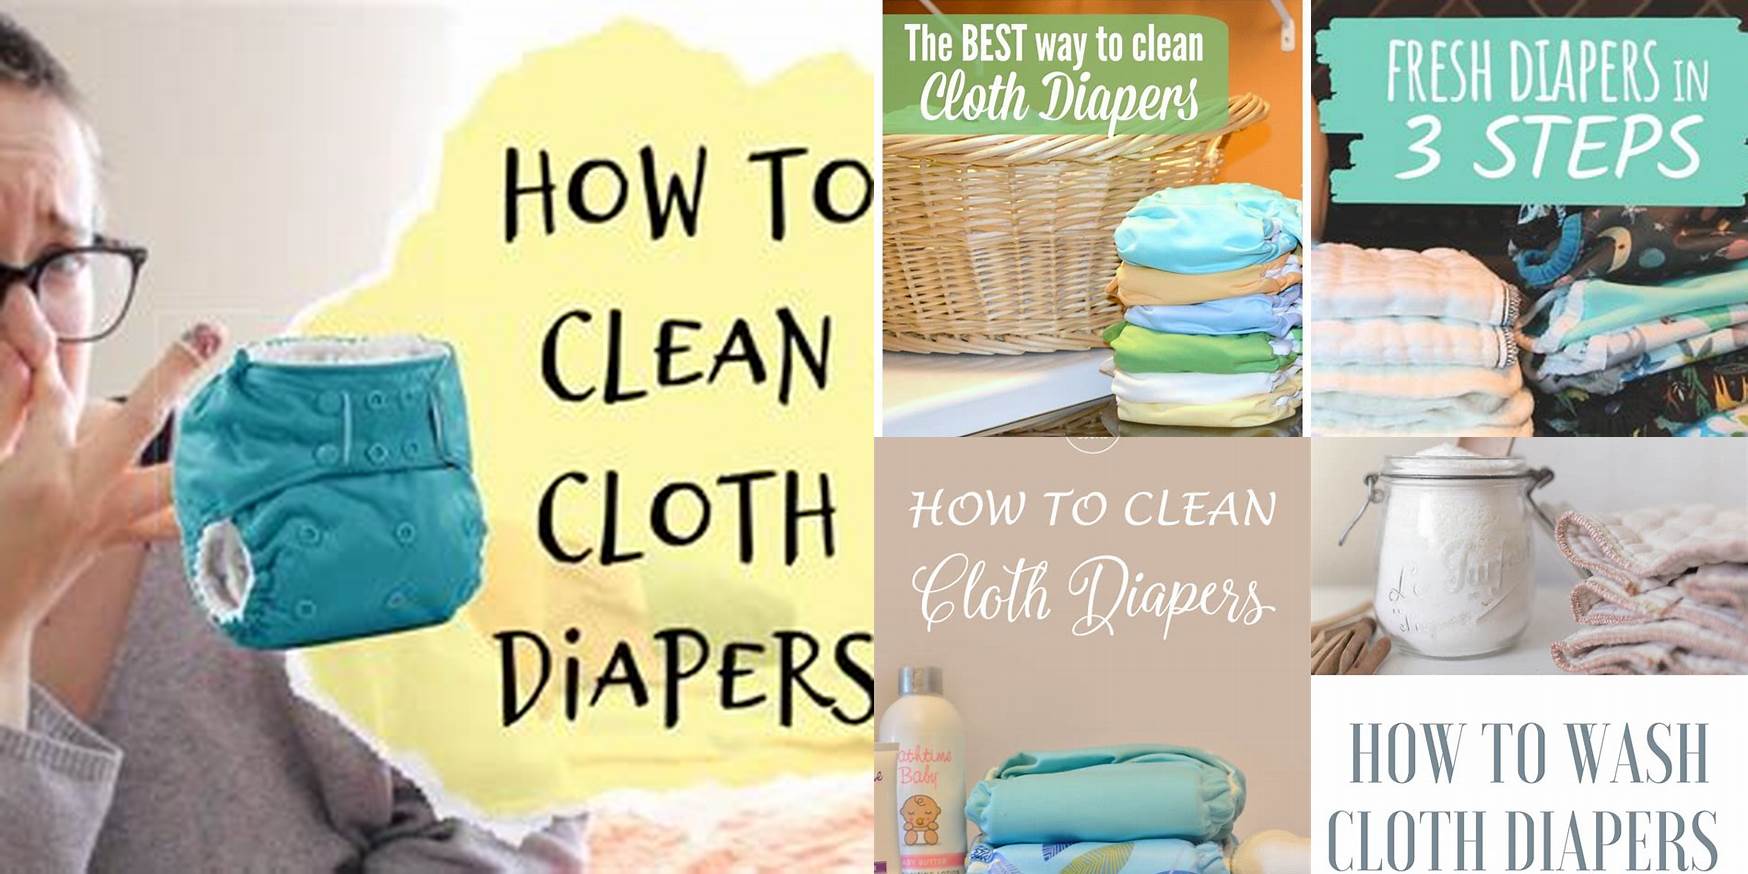 How To Clean Used Cloth Diapers